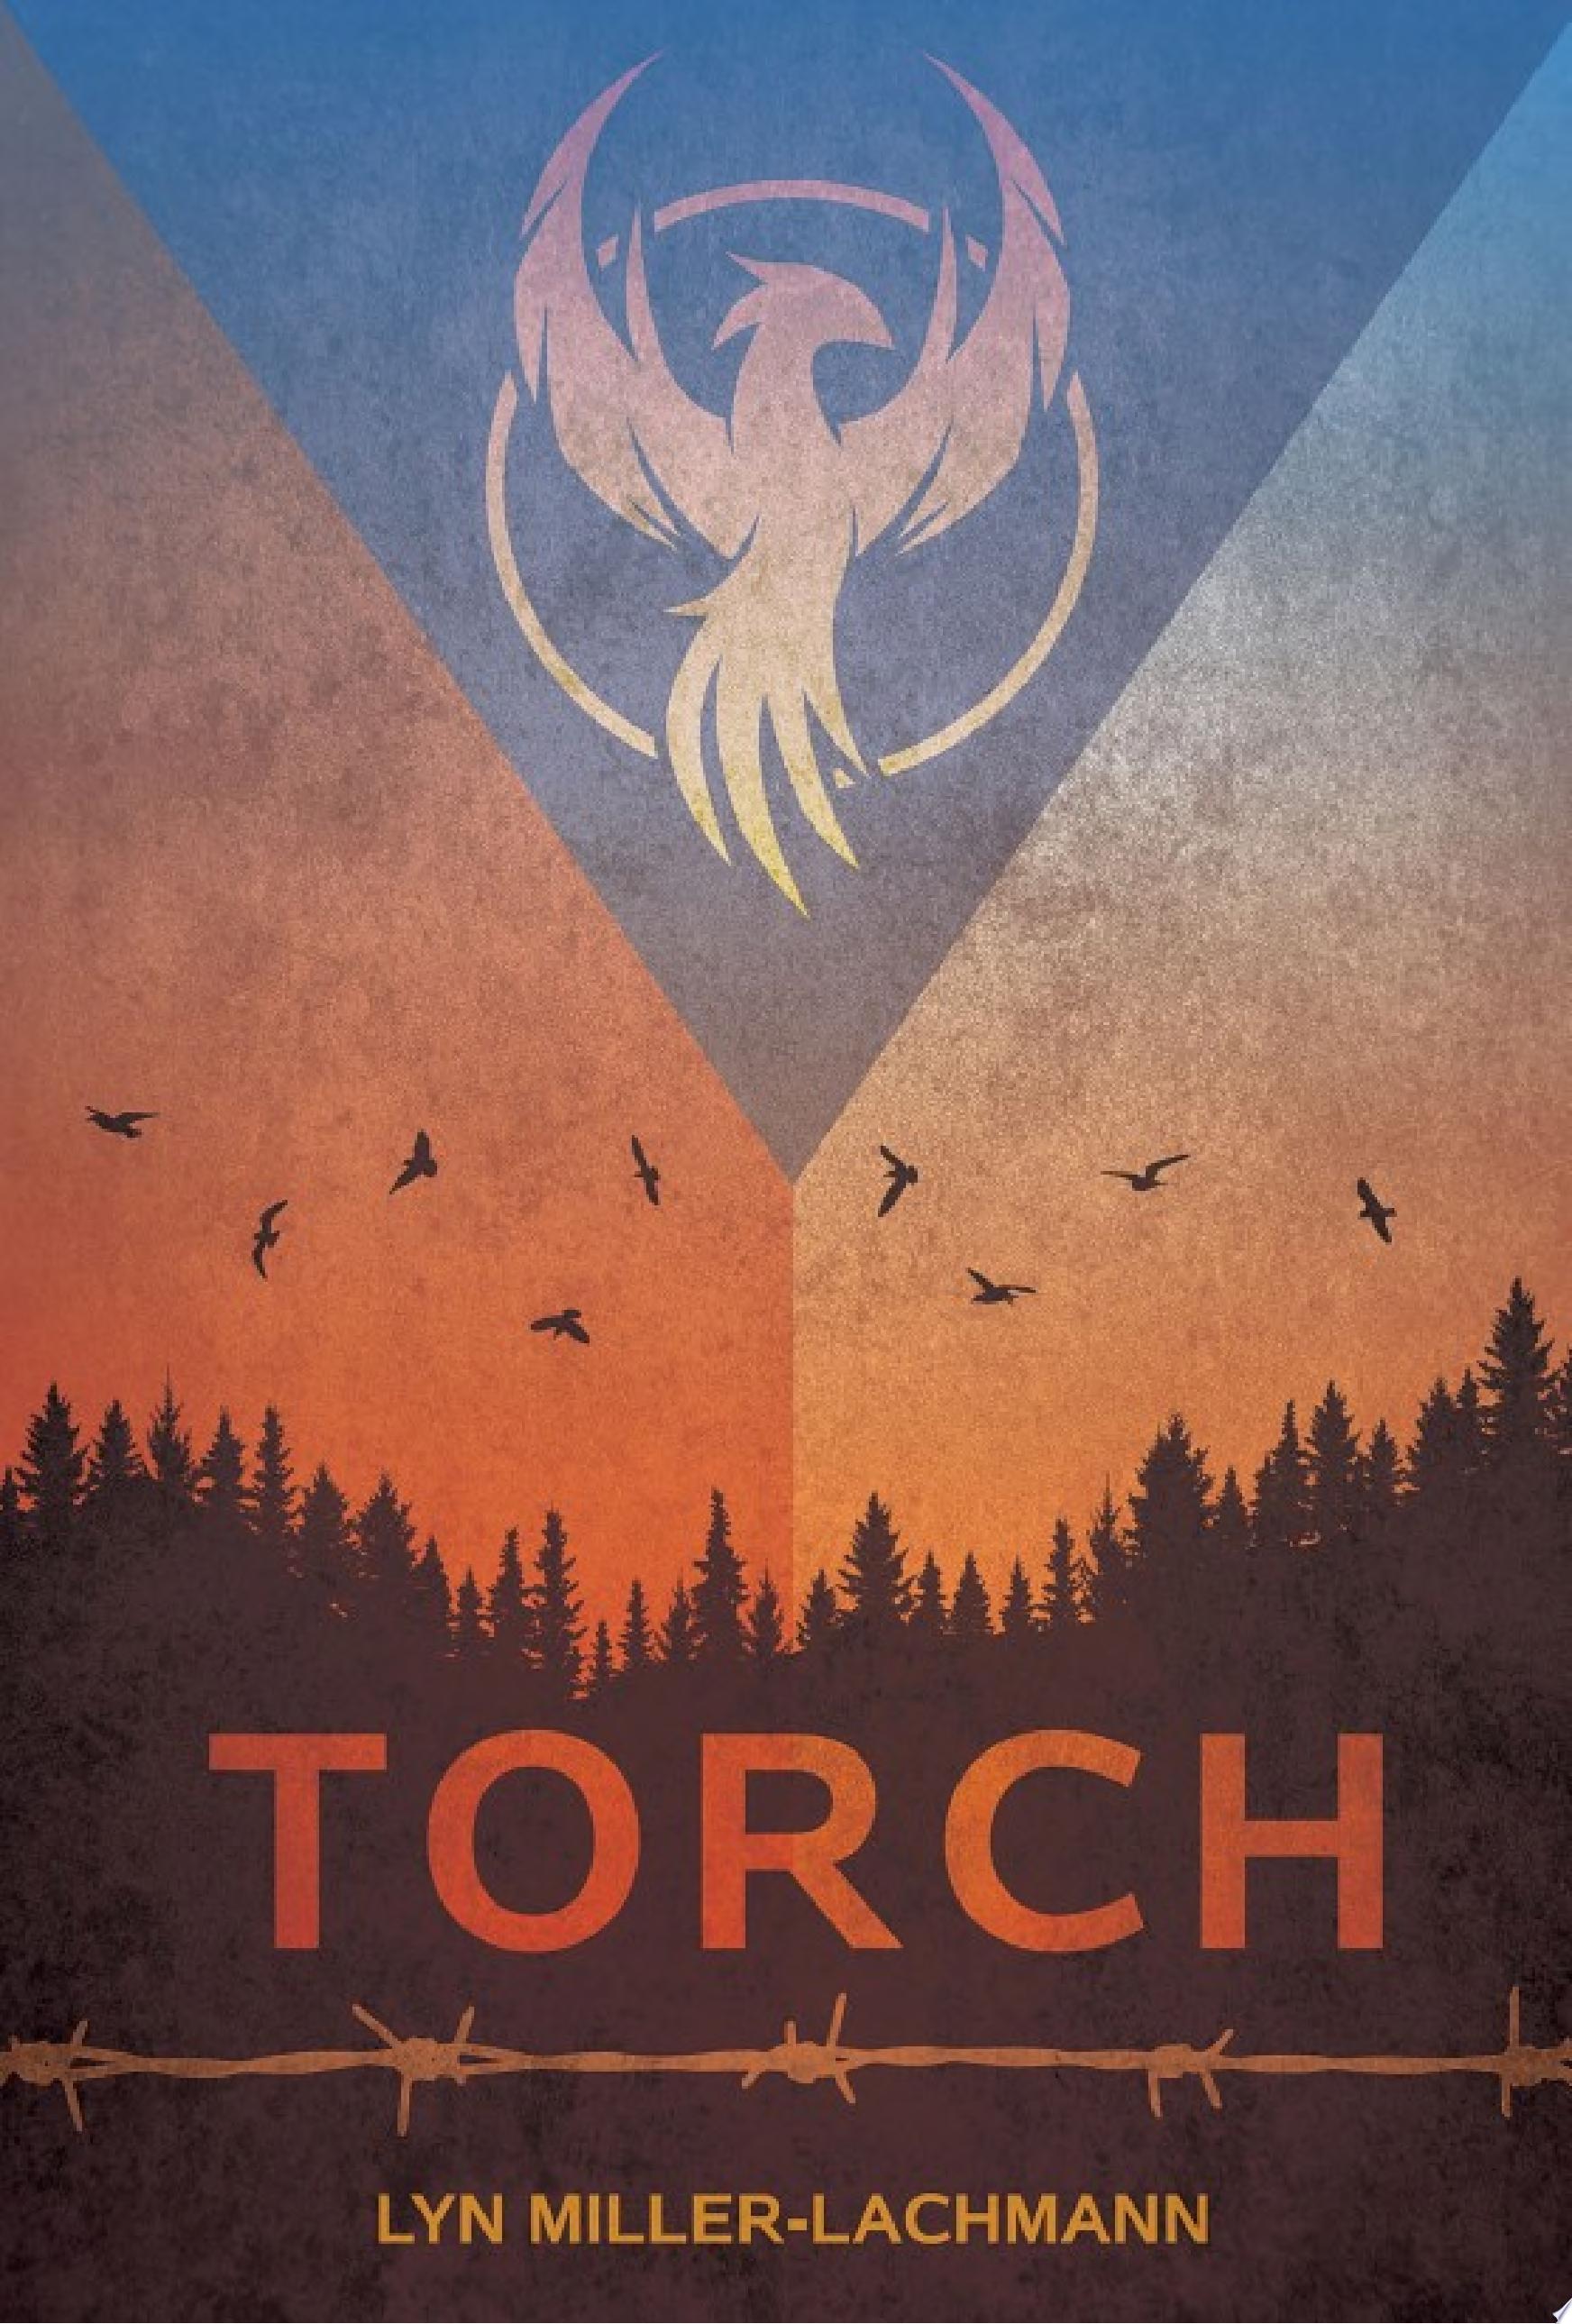 Image for "Torch"